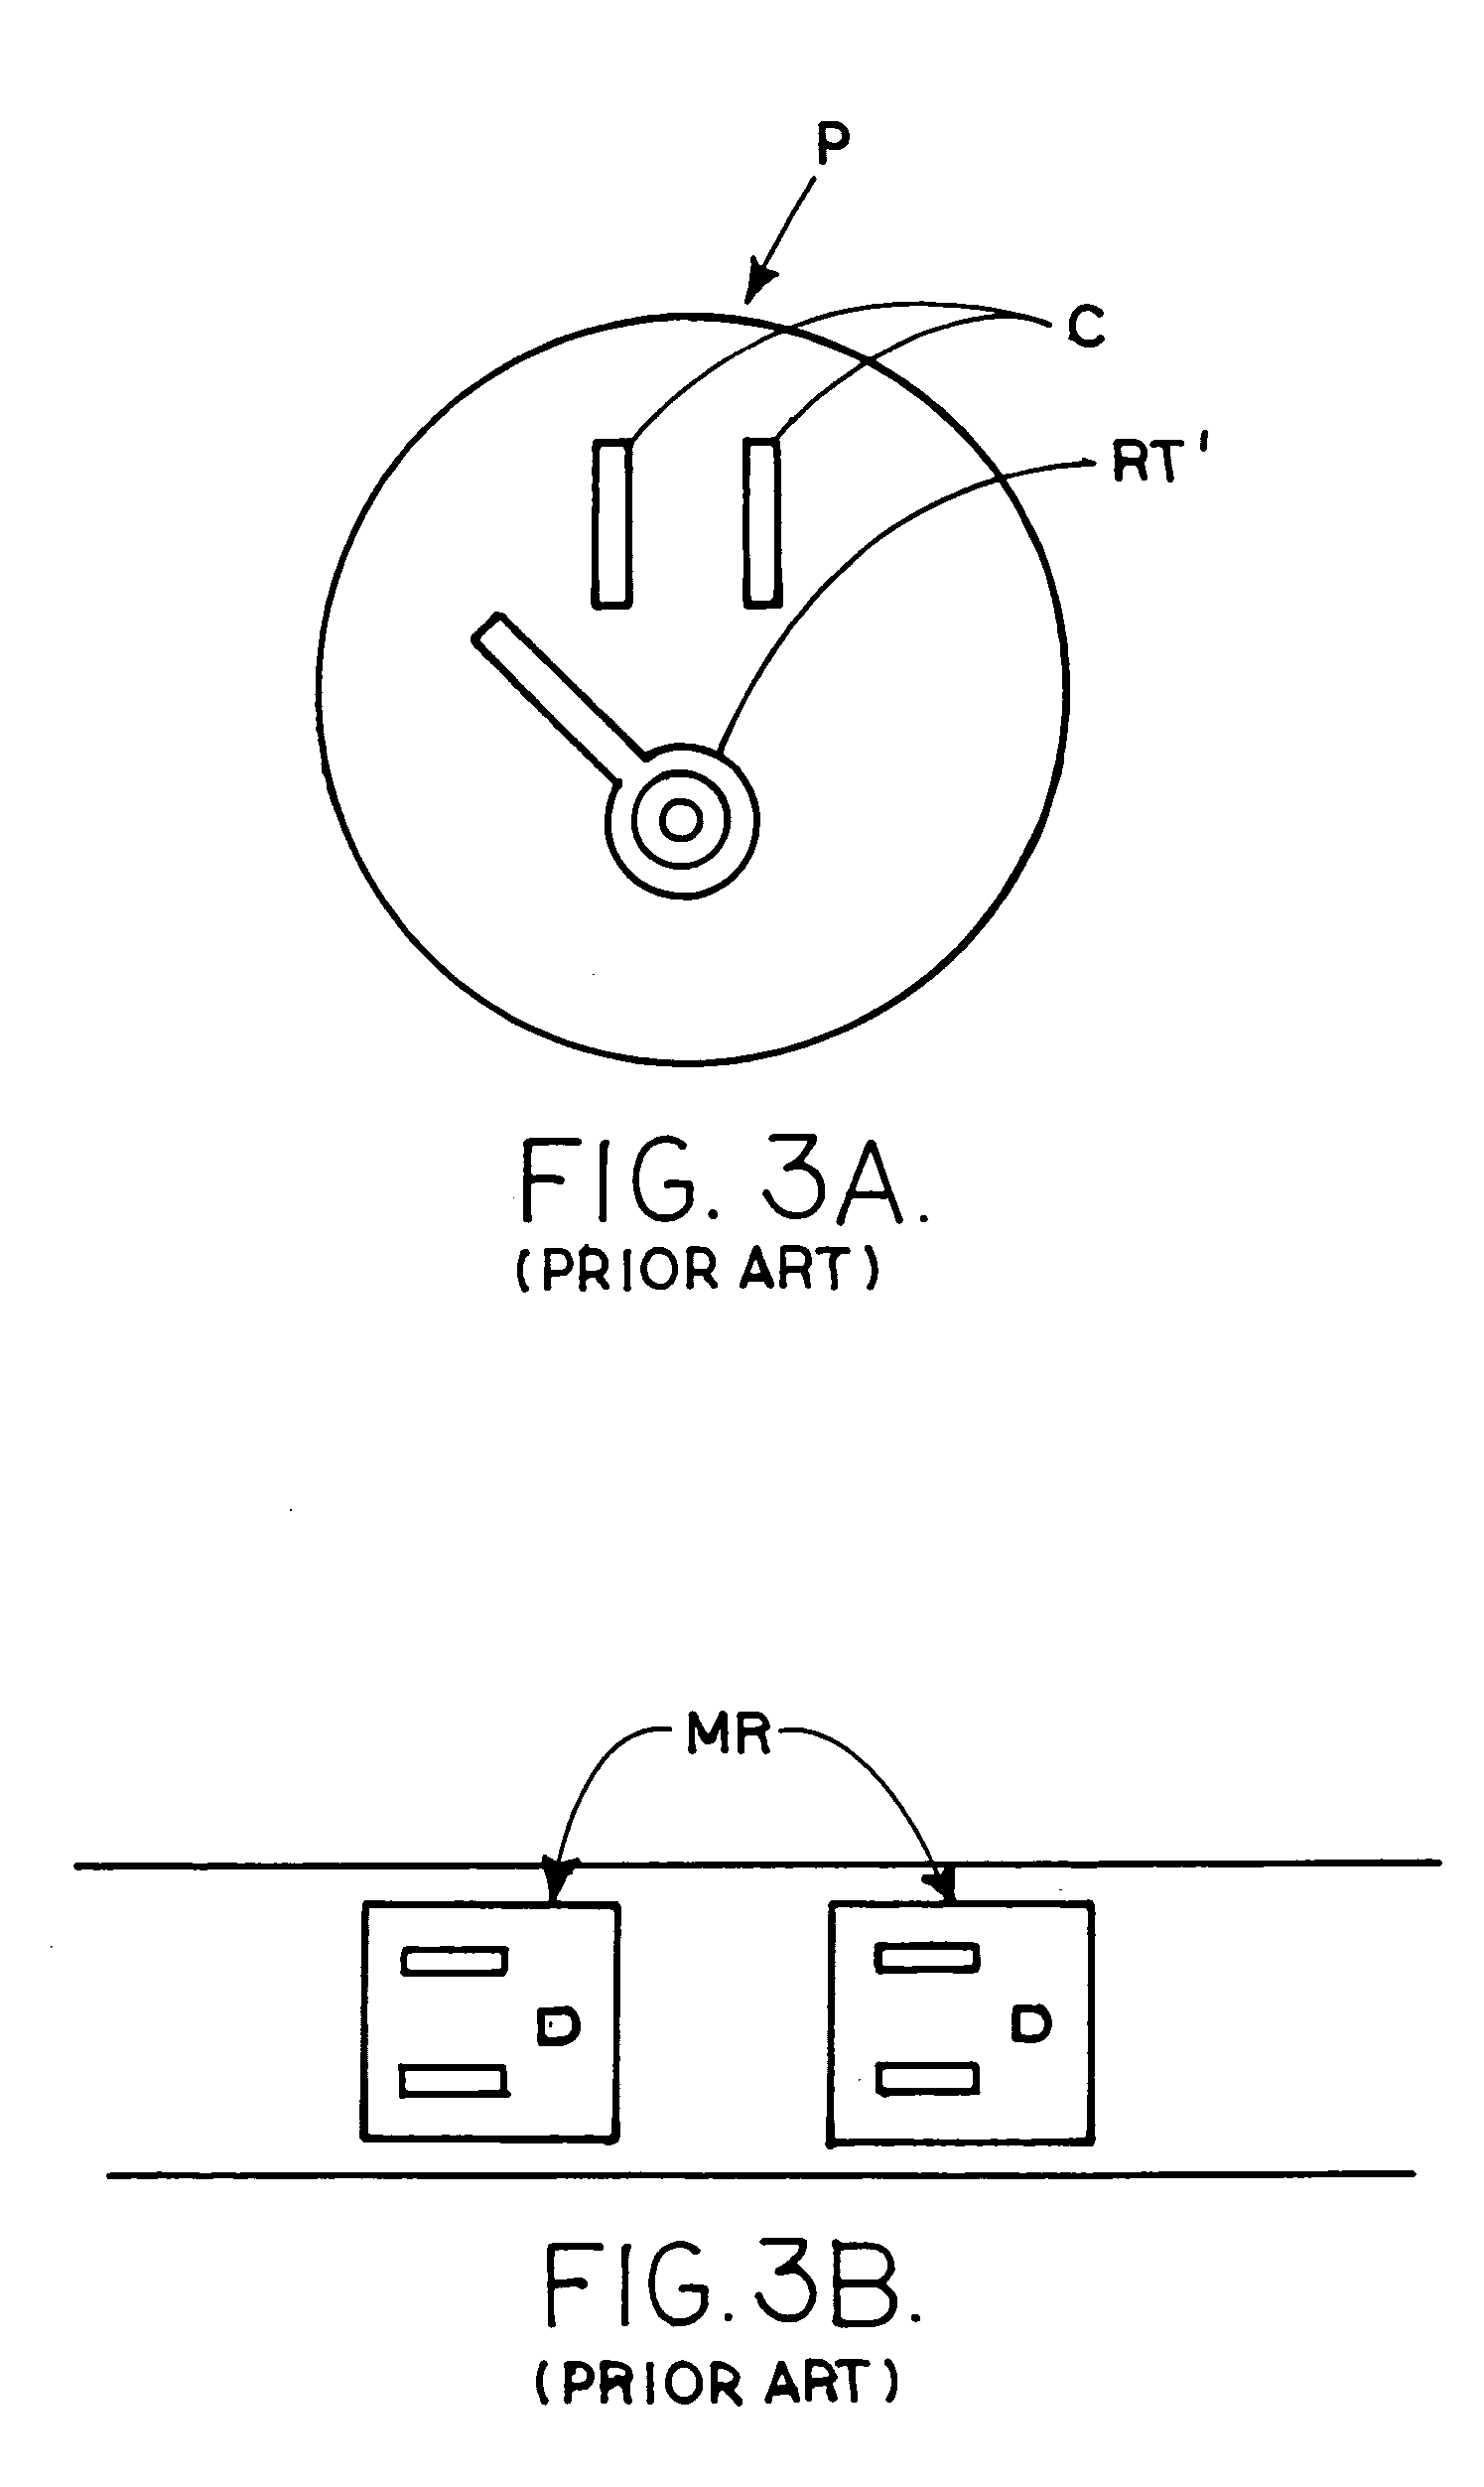 Plug and circuitry for grounding an element